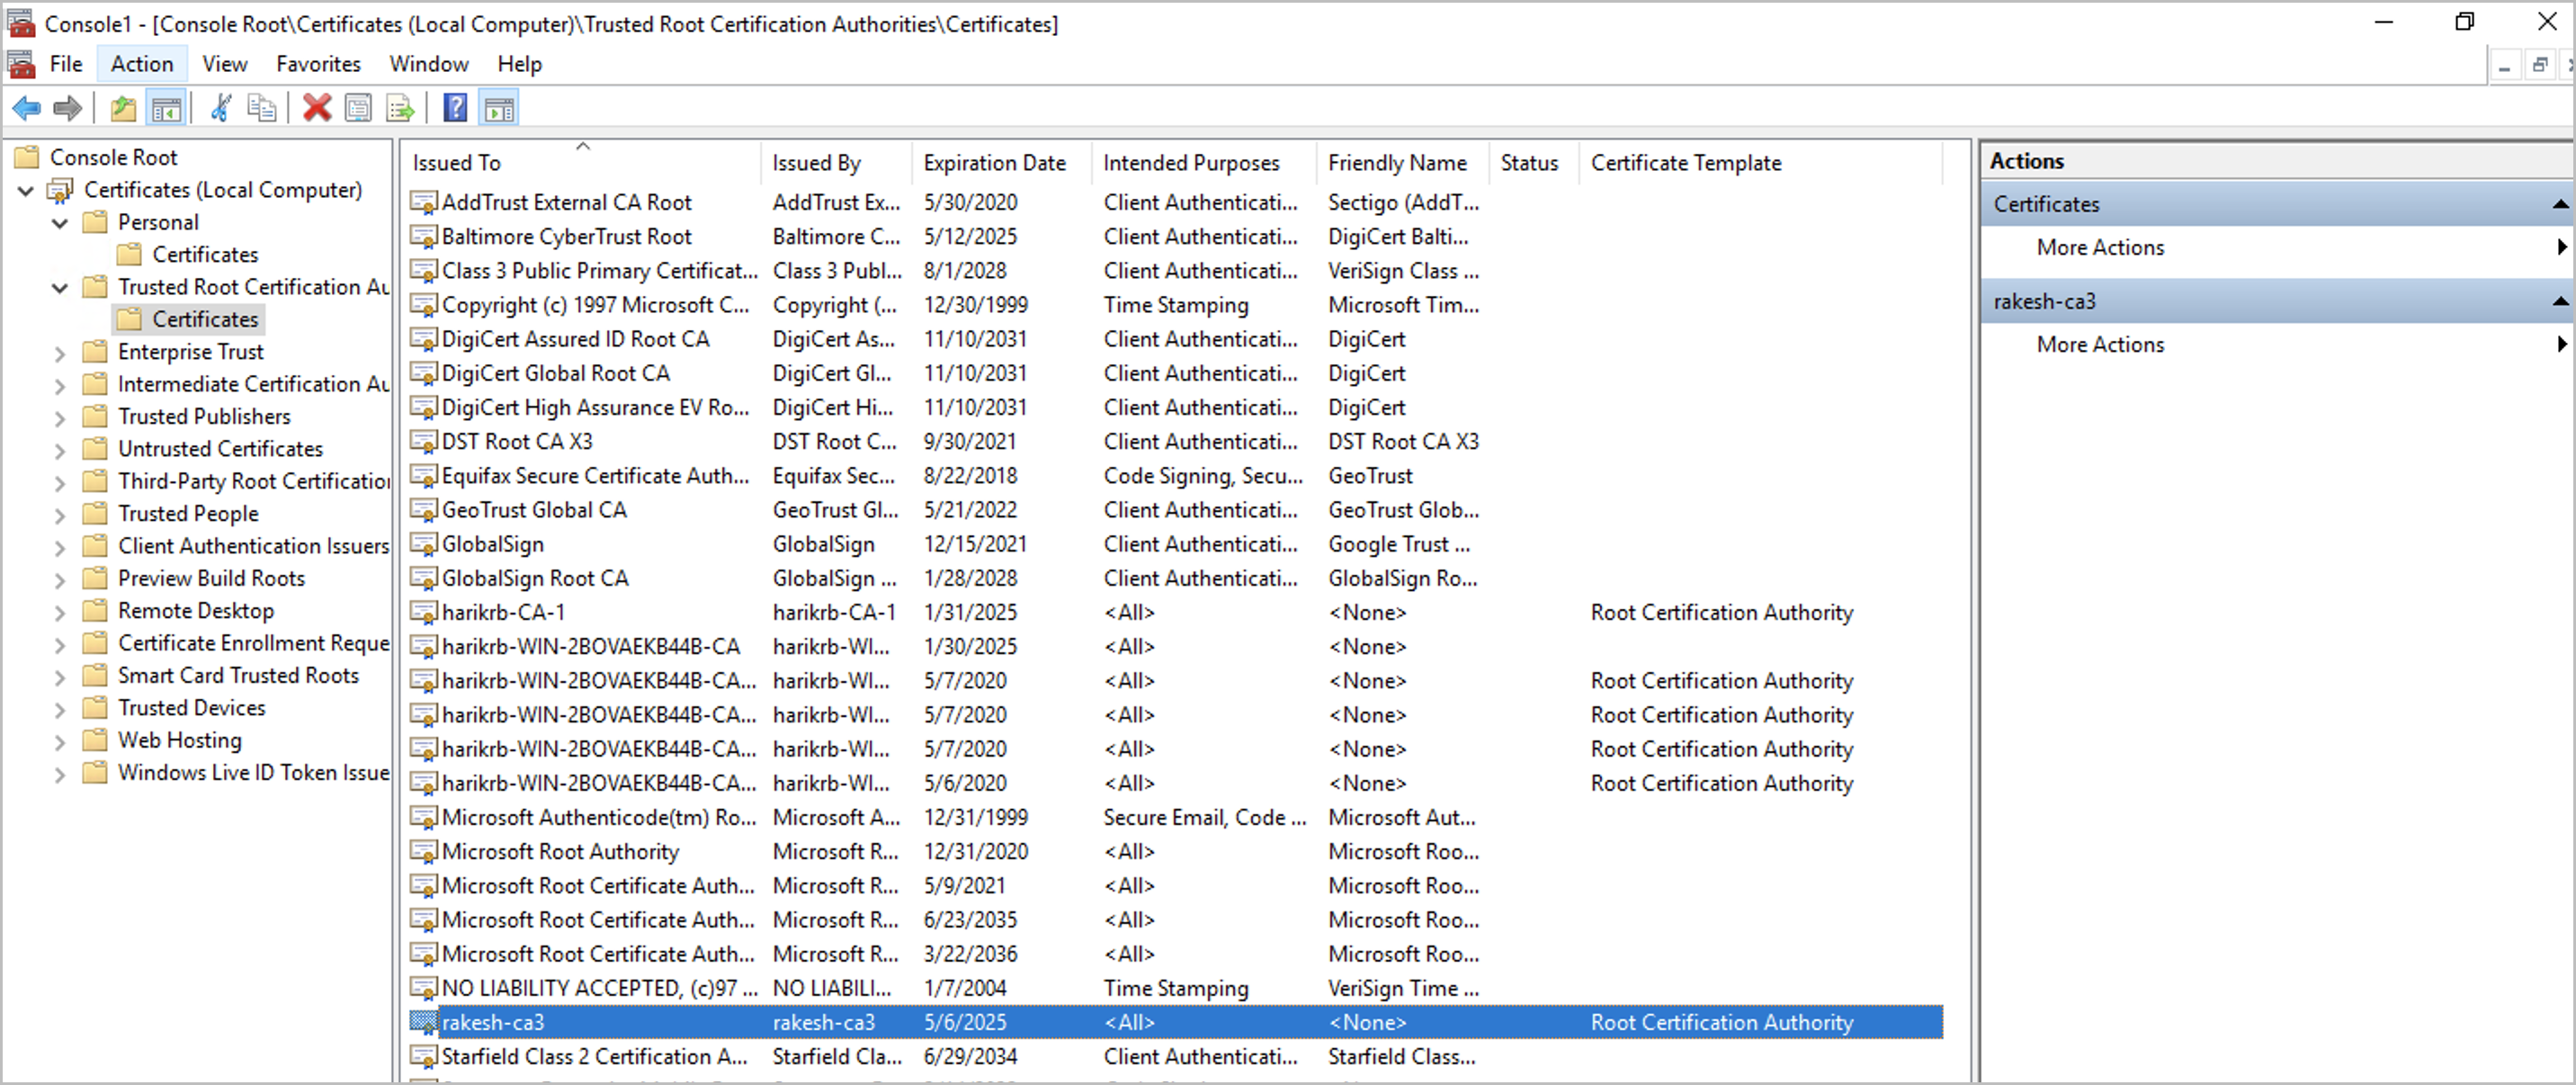 screenshot that shows trusted root certification authorities